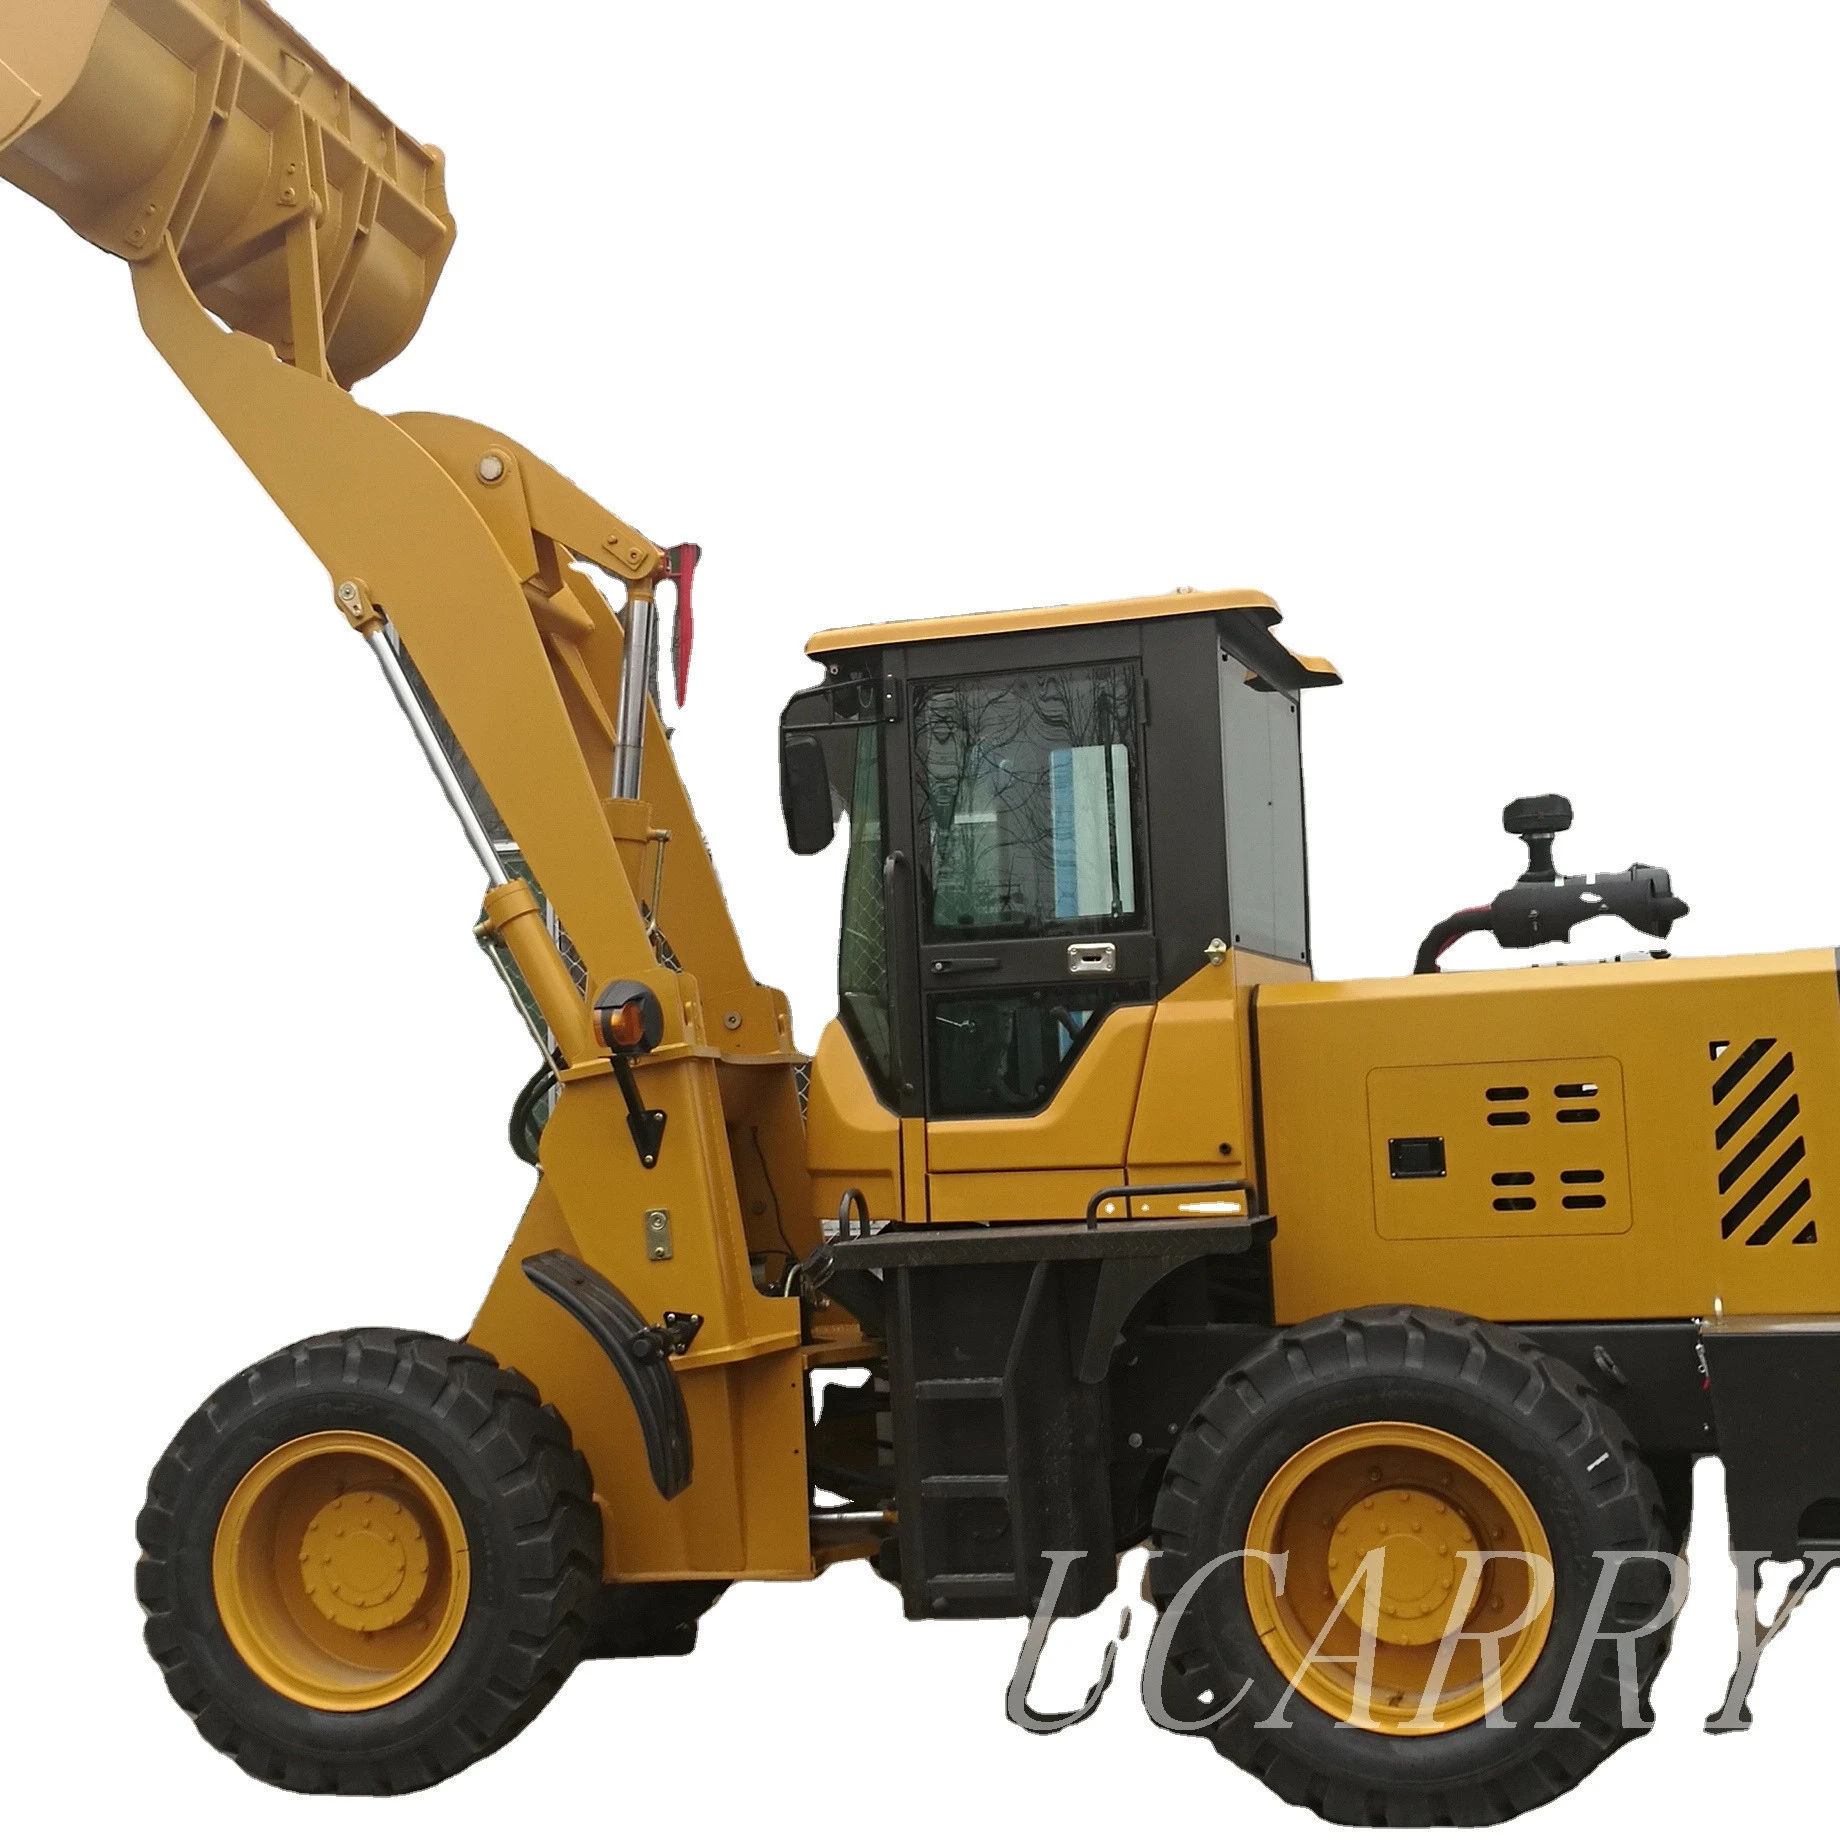 Hot sale wheel loader farm tractors with backhoe attachment